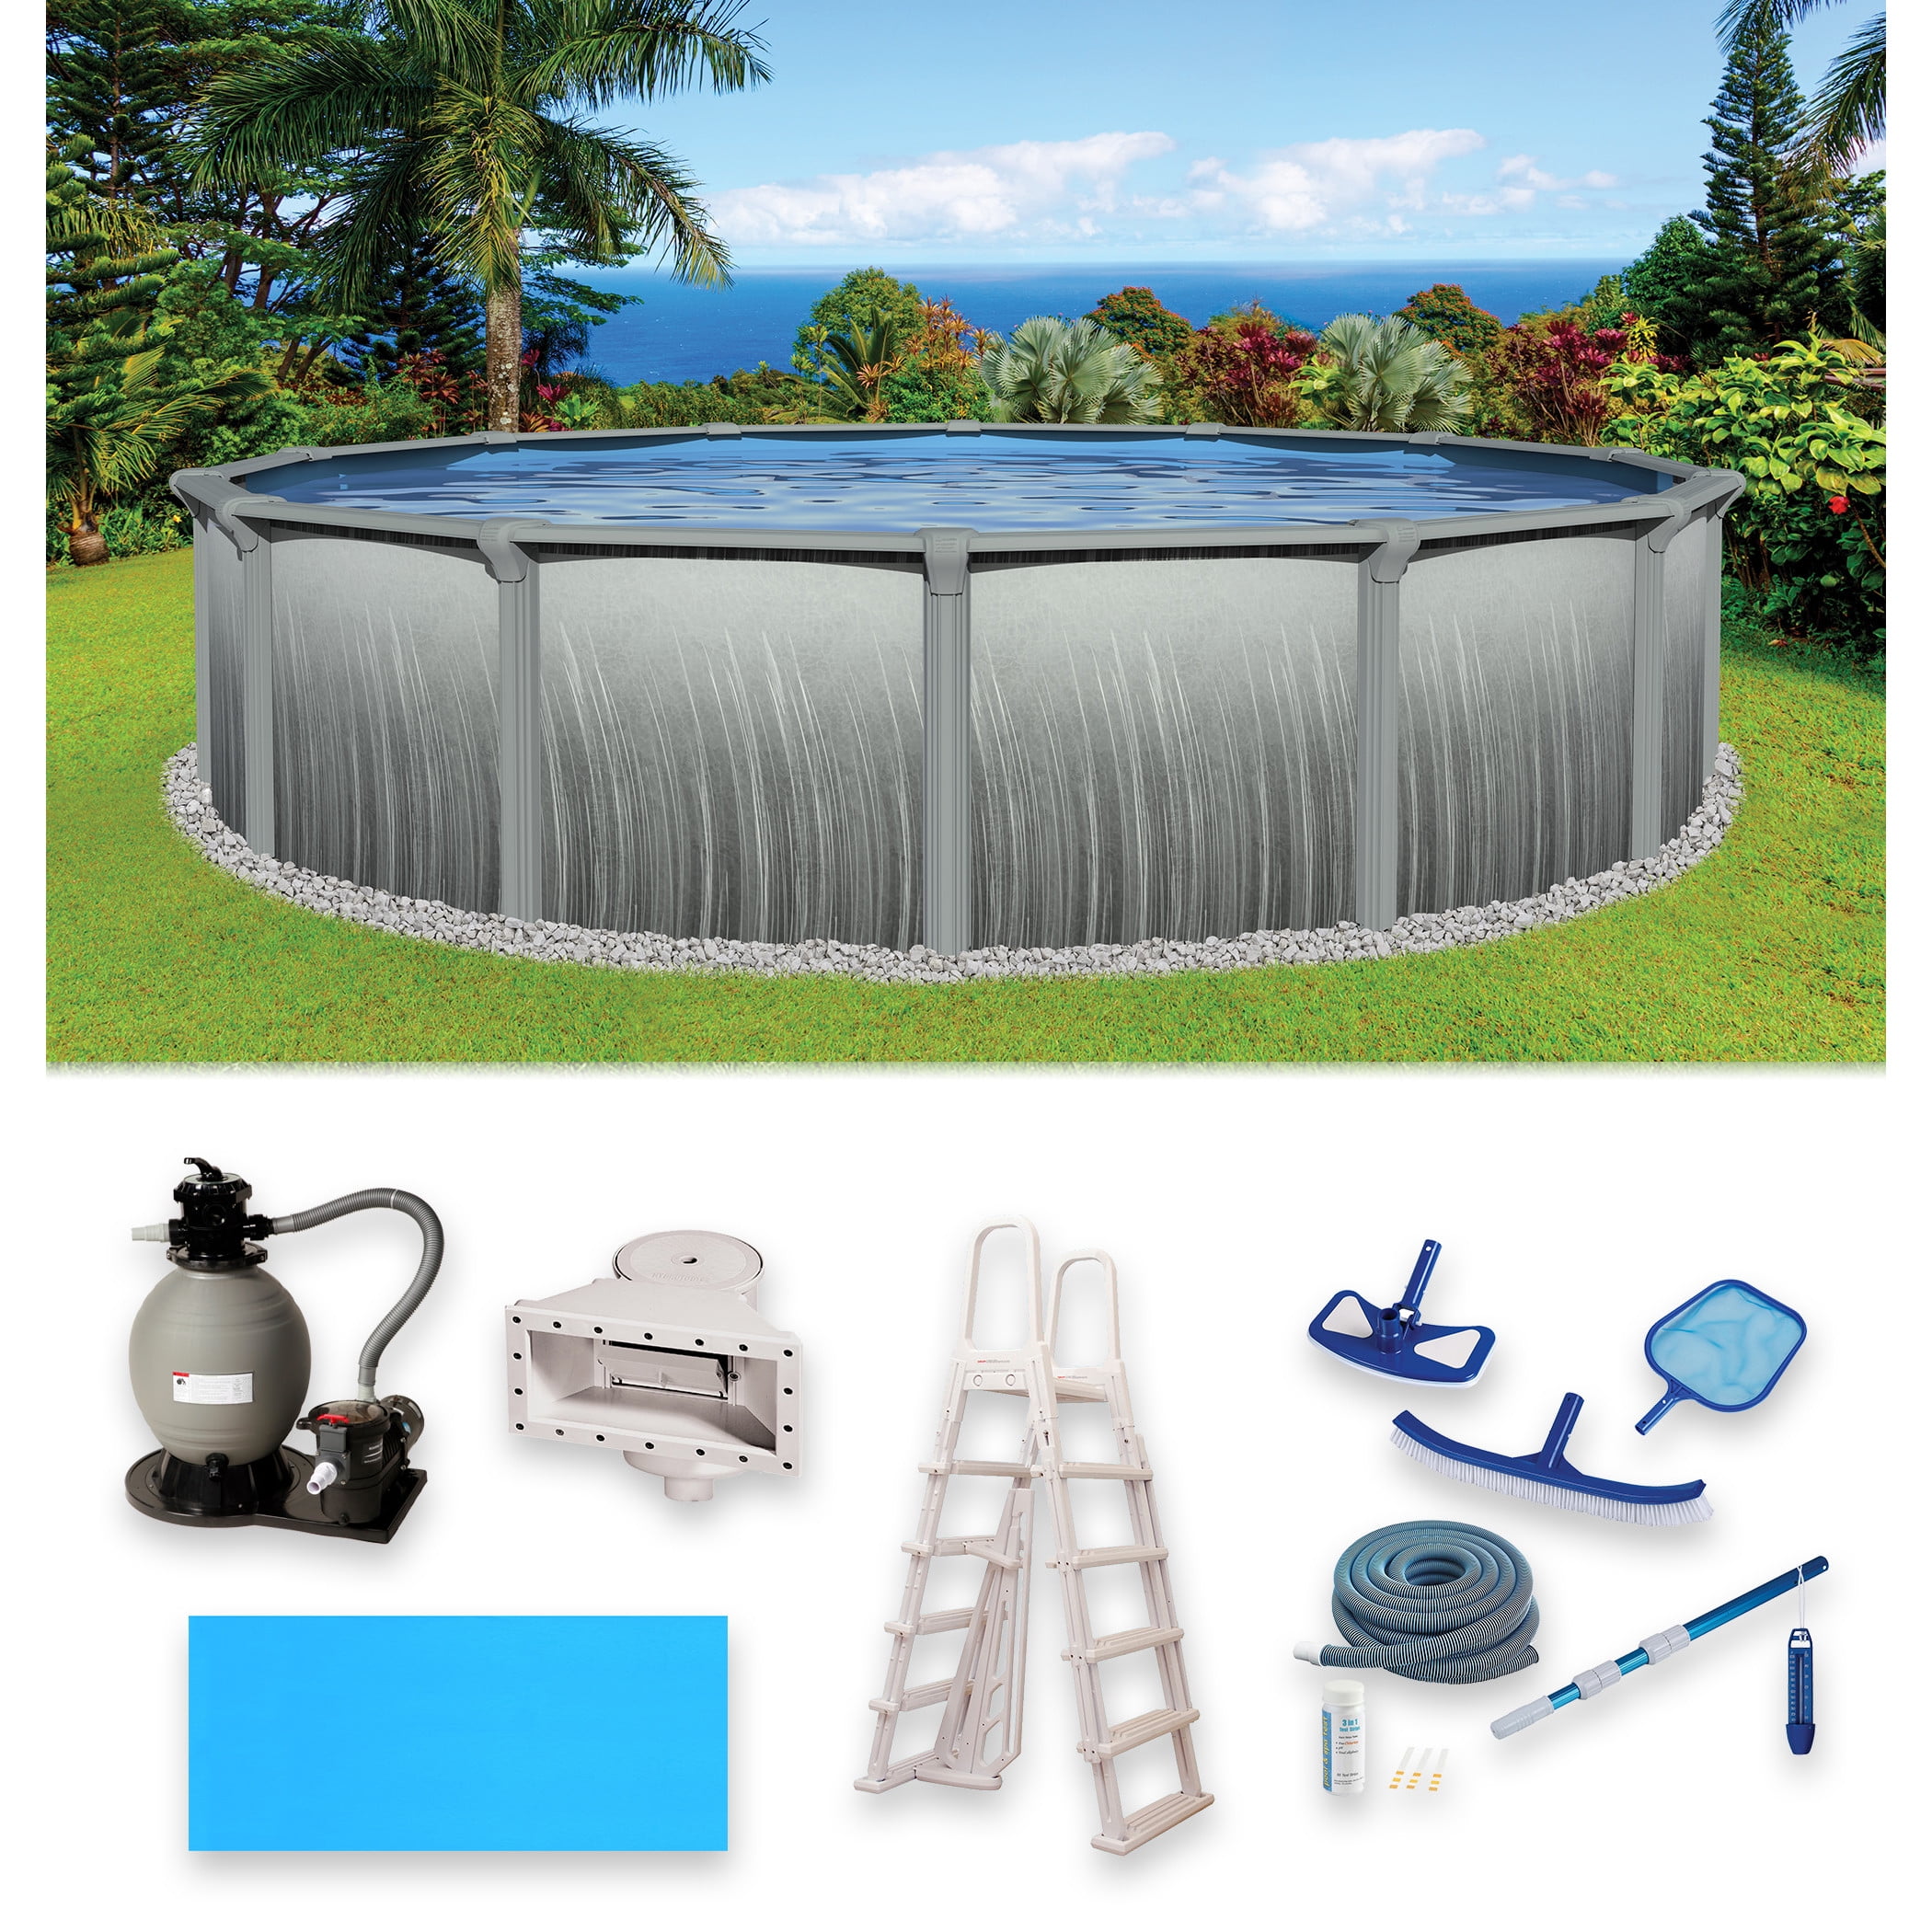 Cove & Foam Details about   Lake Effect Galleria Above Ground Swimming Pool w/ Liner Guard 